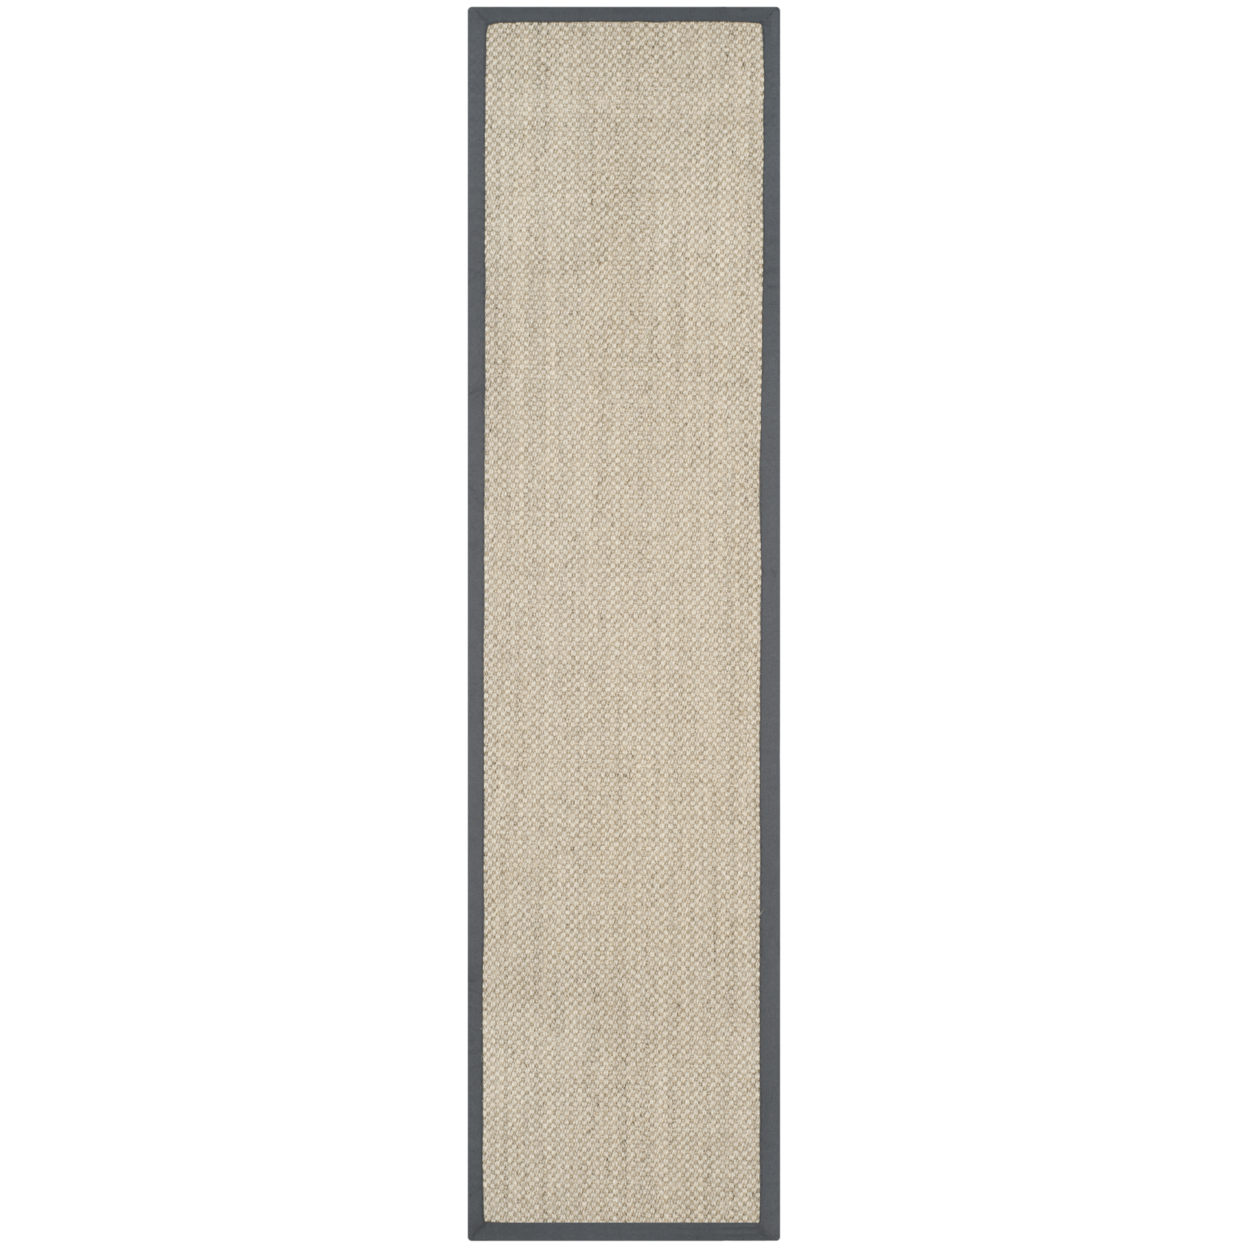 SAFAVIEH Natural Fiber Collection NF443B Marble/Grey Rug - 2' X 8'